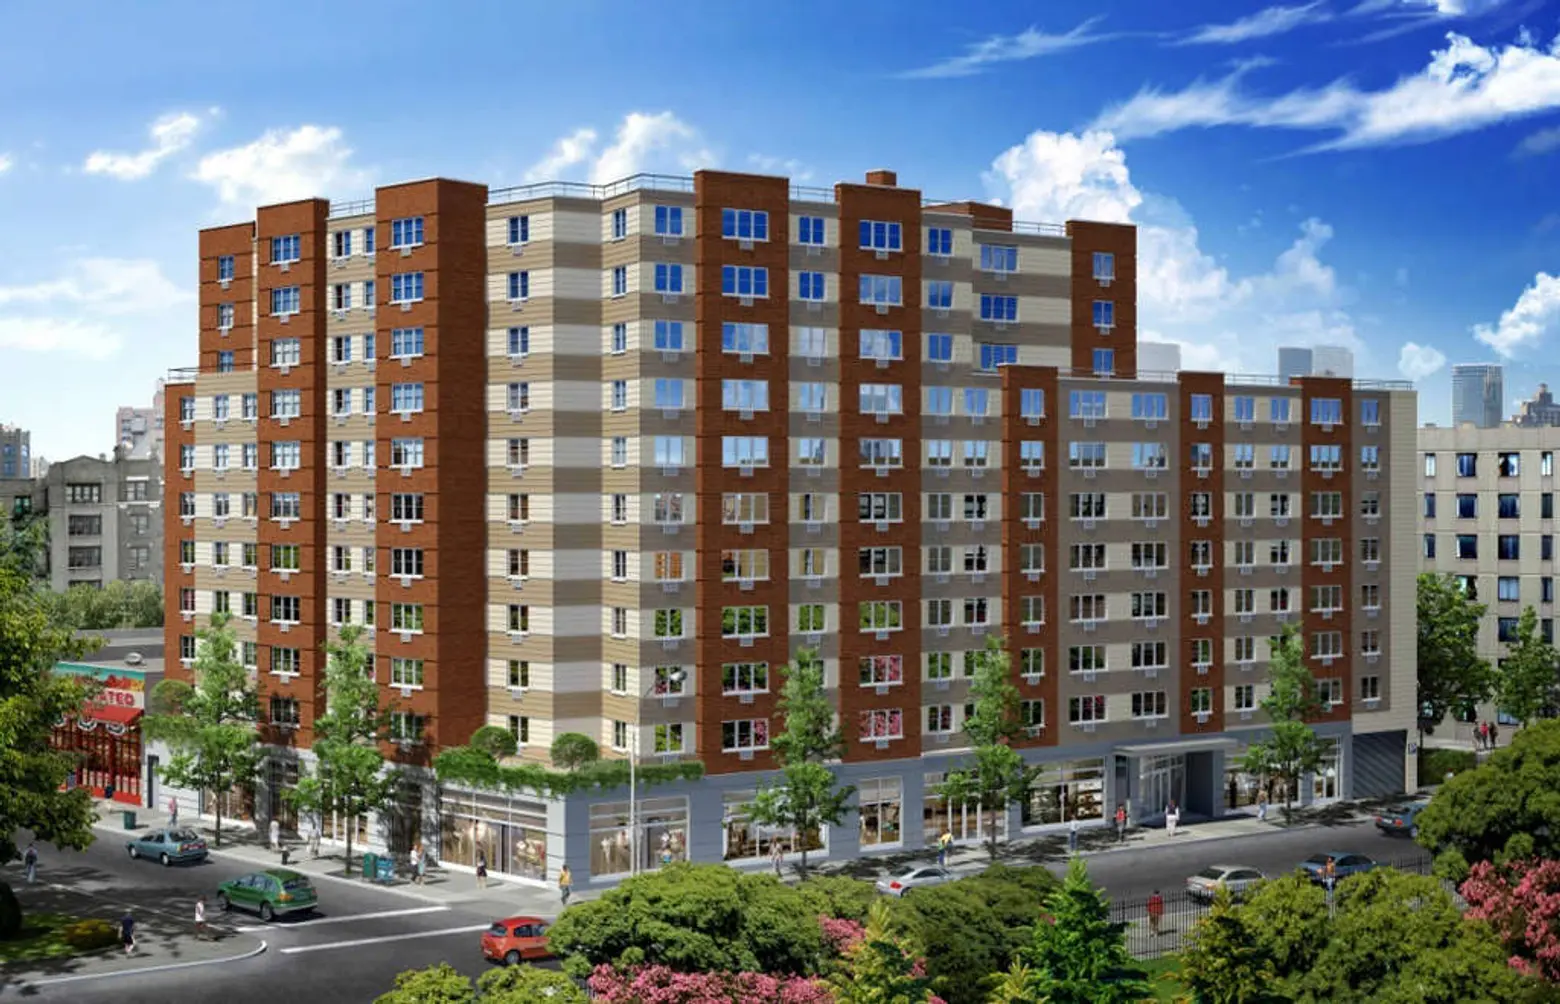 Live in a new mixed-use building in the Bronx’s Mount Hope neighborhood from $368/month